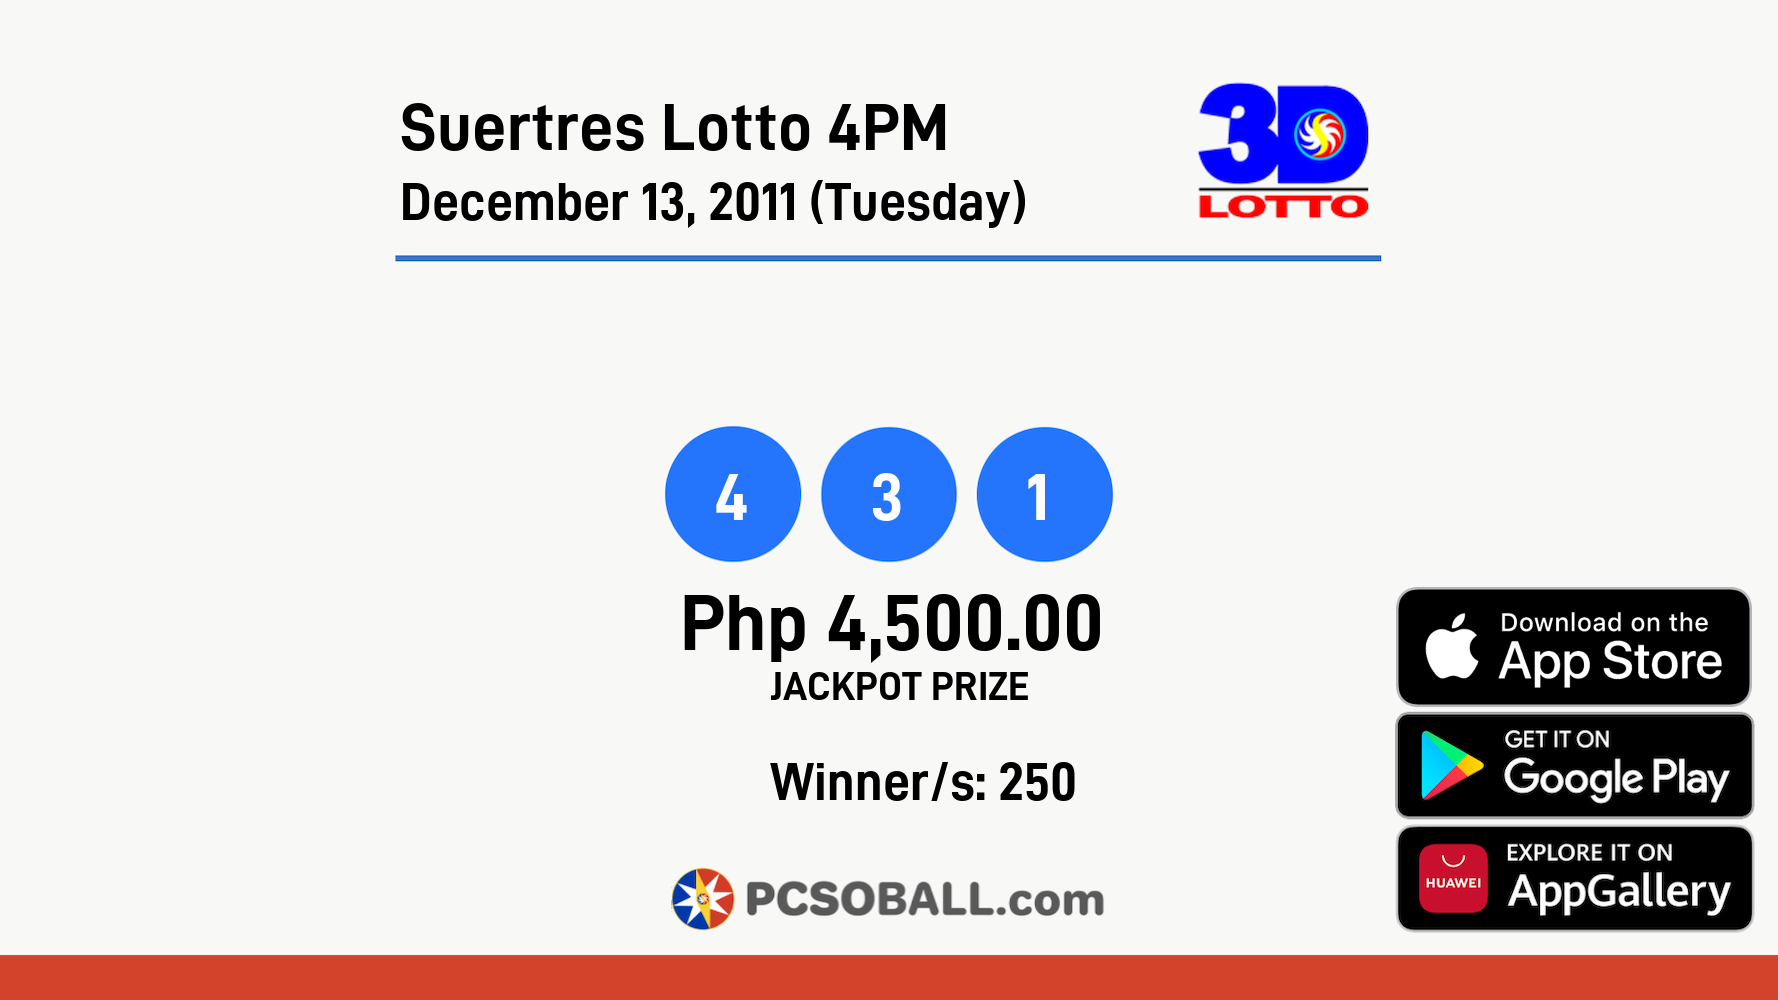 Suertres Lotto 4PM December 13, 2011 (Tuesday) Result